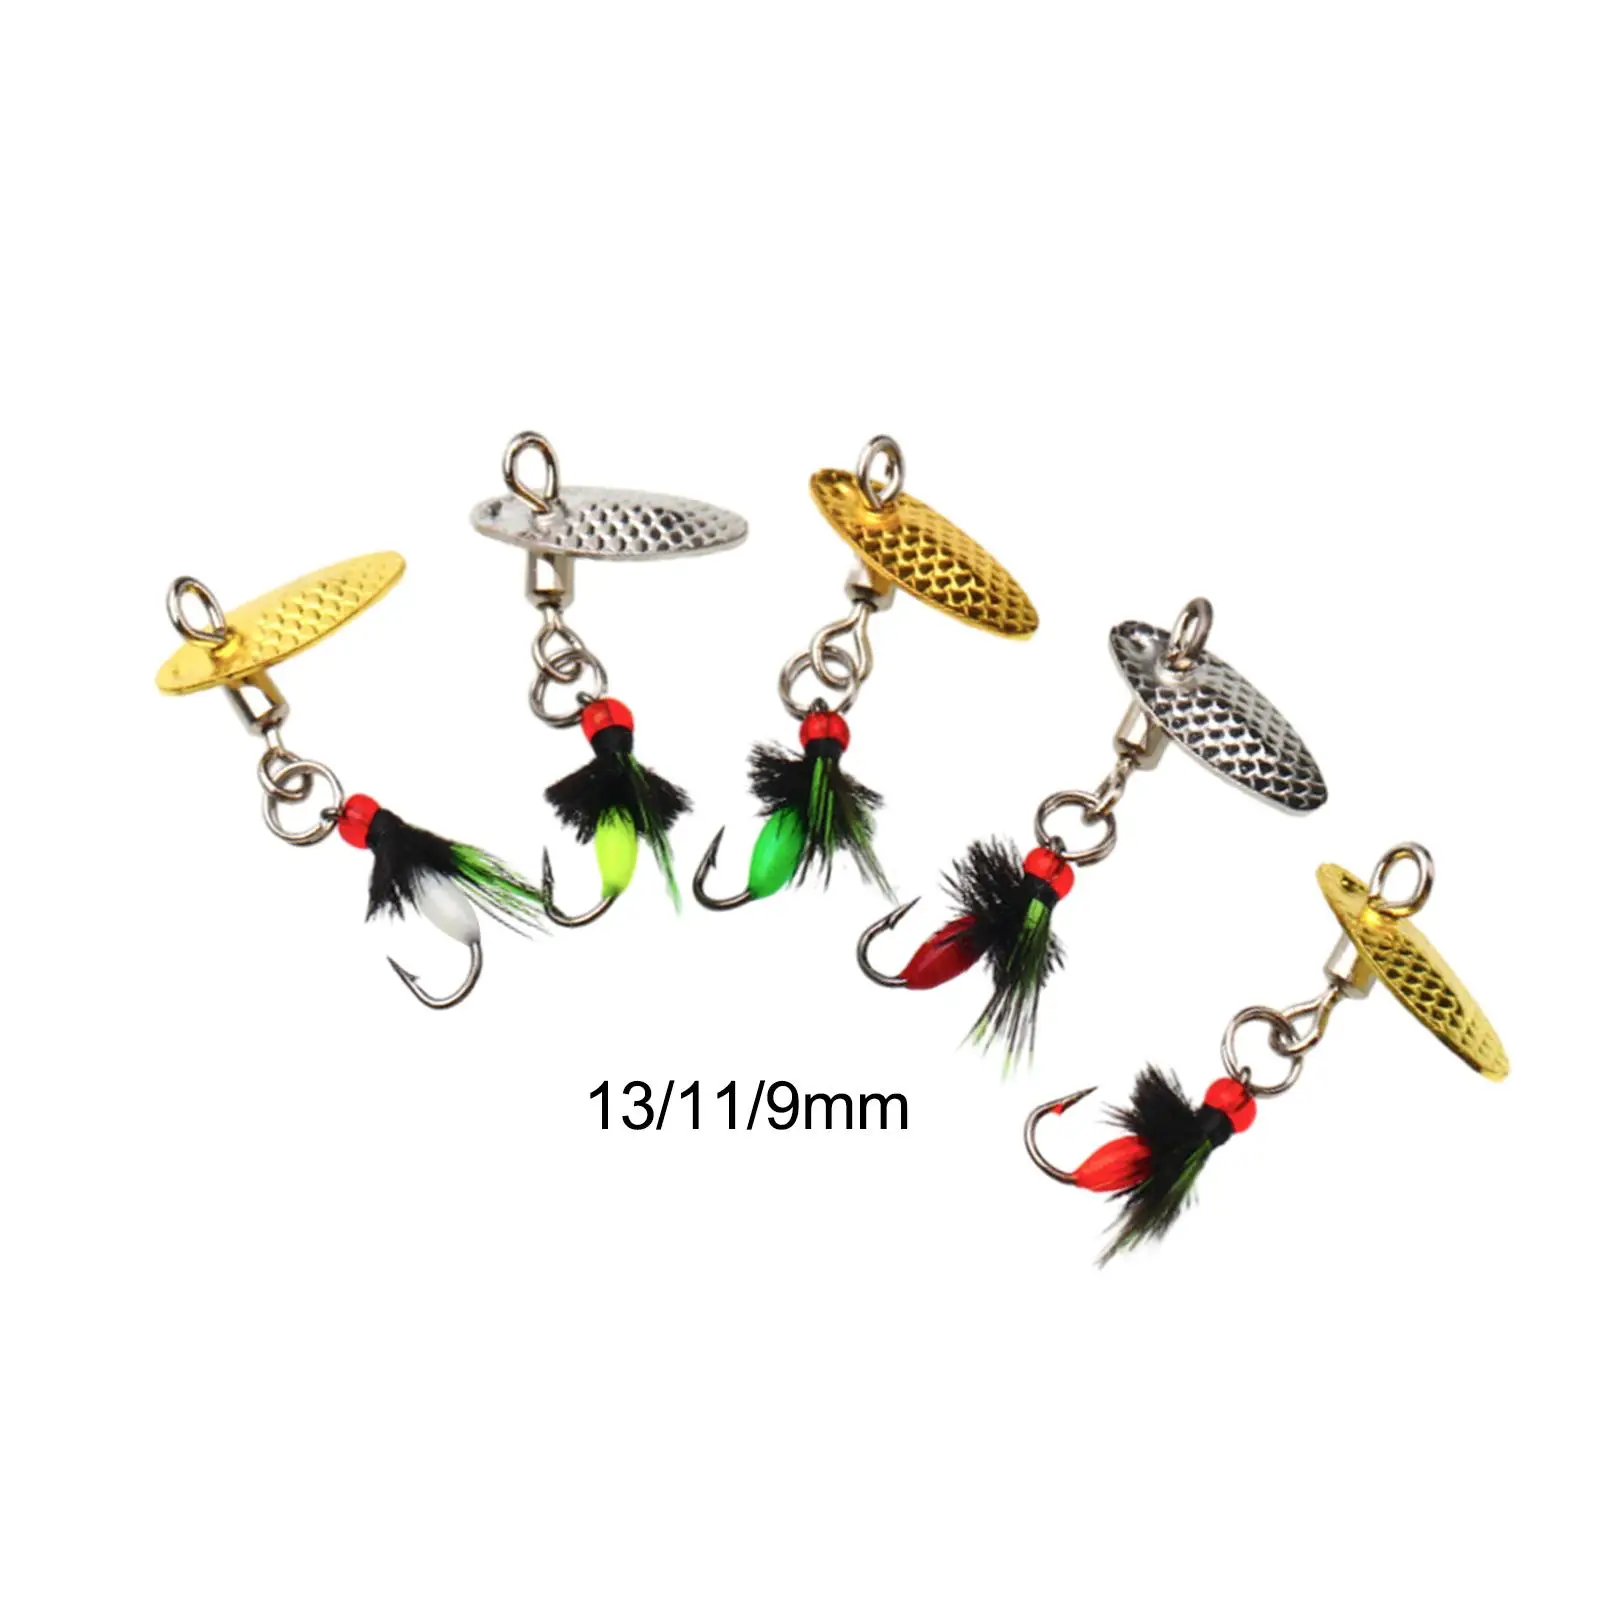 https://ae01.alicdn.com/kf/Sfa726cef45034ed684043203eadd8082y/5x-Fishing-Lures-Spinnerbait-Trout-Lures-Fishing-Tackle-with-Tackle-Box-Hard-Metal-Lures-Inline-Spinnerbaits.jpg